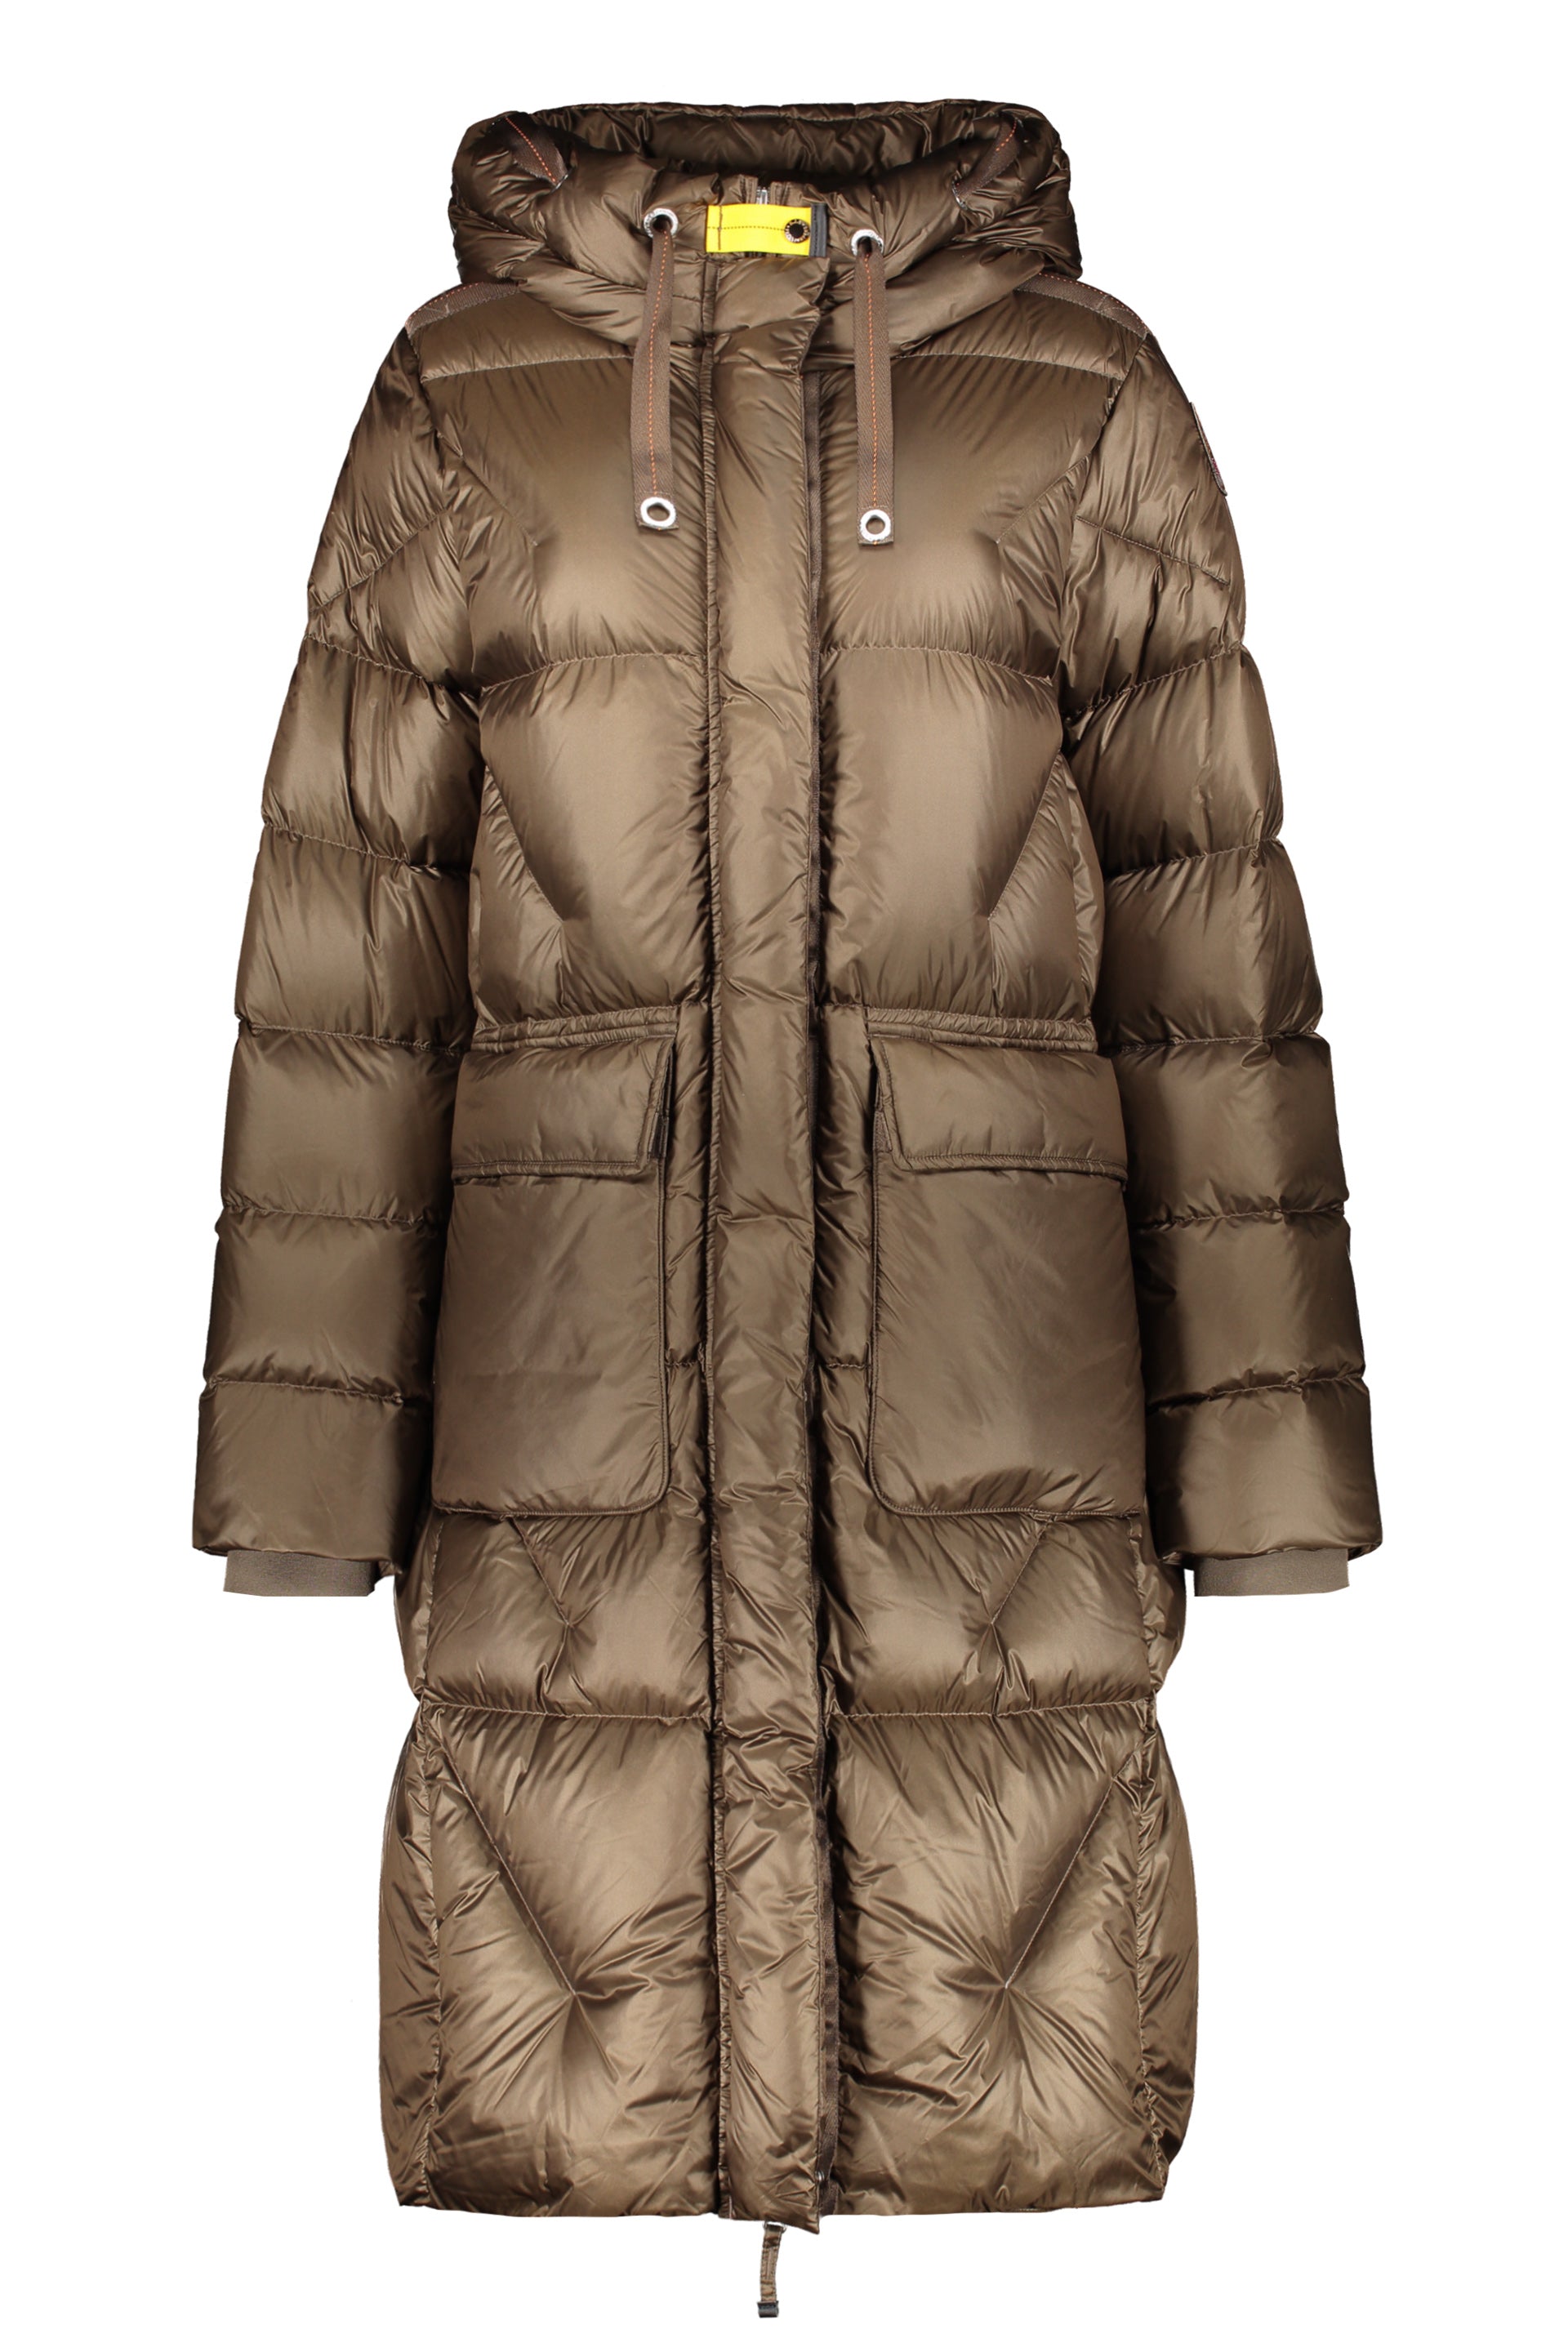 Parajumpers-OUTLET-SALE-Leonie-hooded-down-jacket-Jacken-Mantel-L-ARCHIVE-COLLECTION.jpg